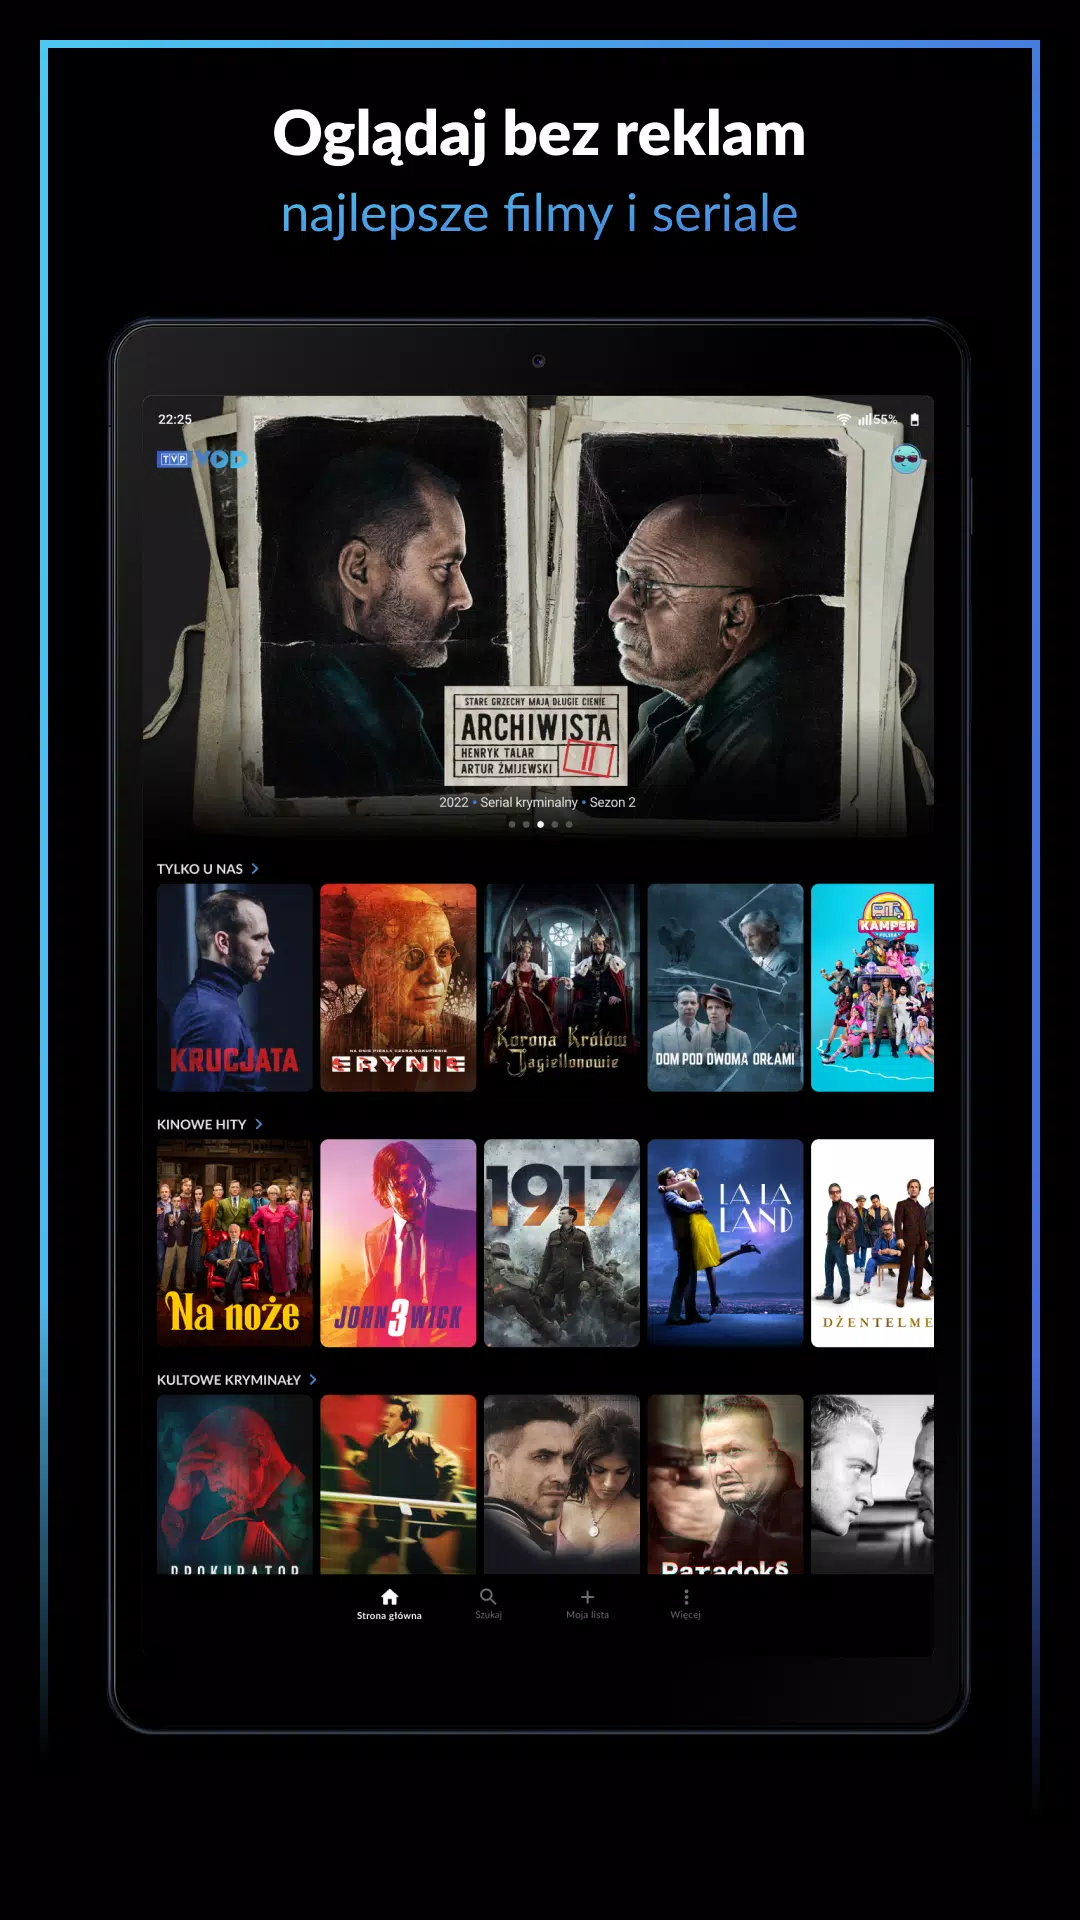 TVP VOD APK for Android Download